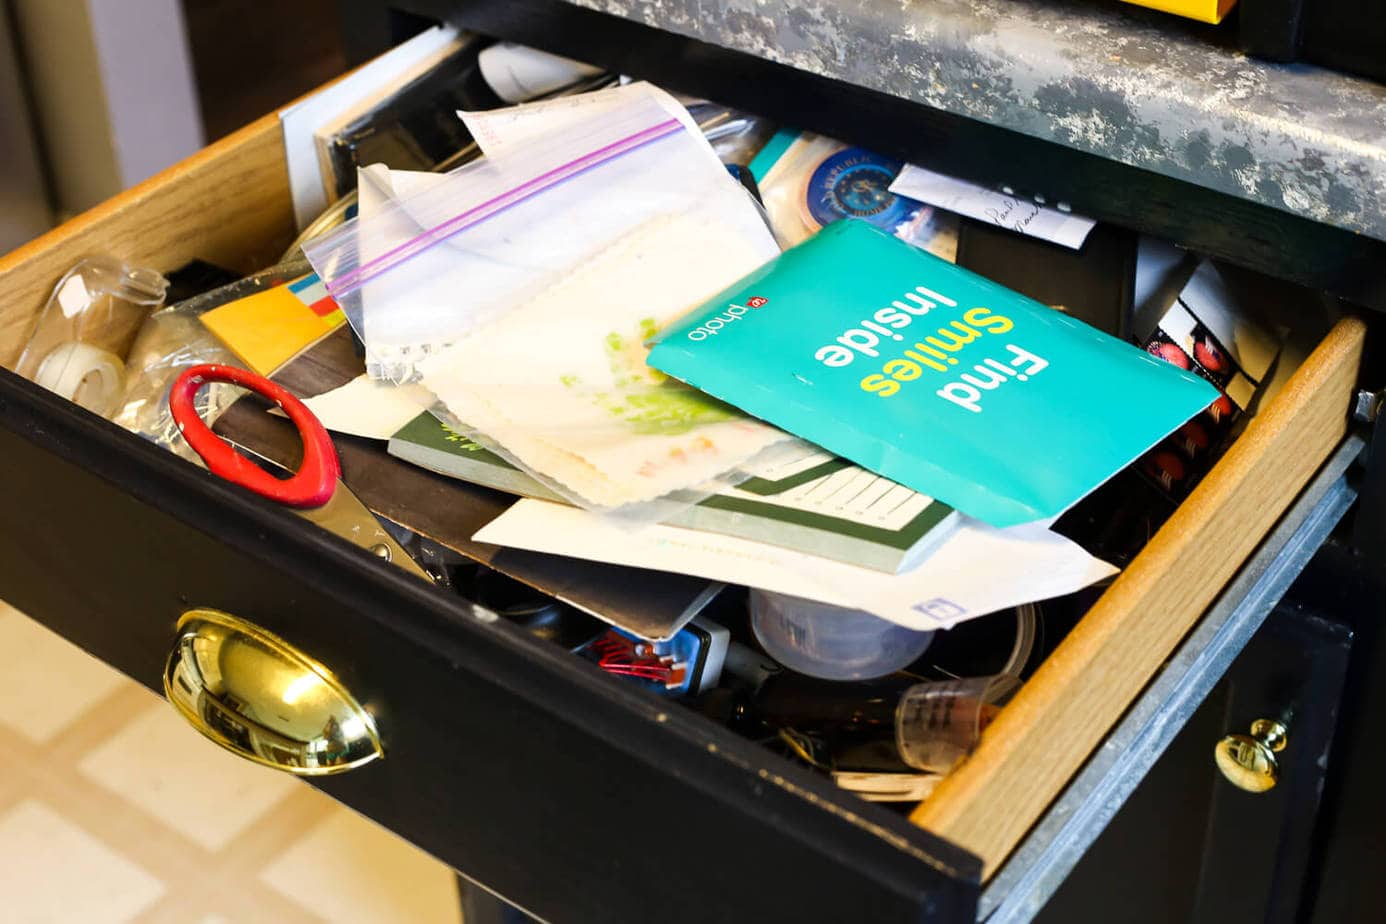 Tips on junk drawer organization - how to get your junk drawer completely organized without having to spend any money! Great, affordable solutions for a messy kitchen! 